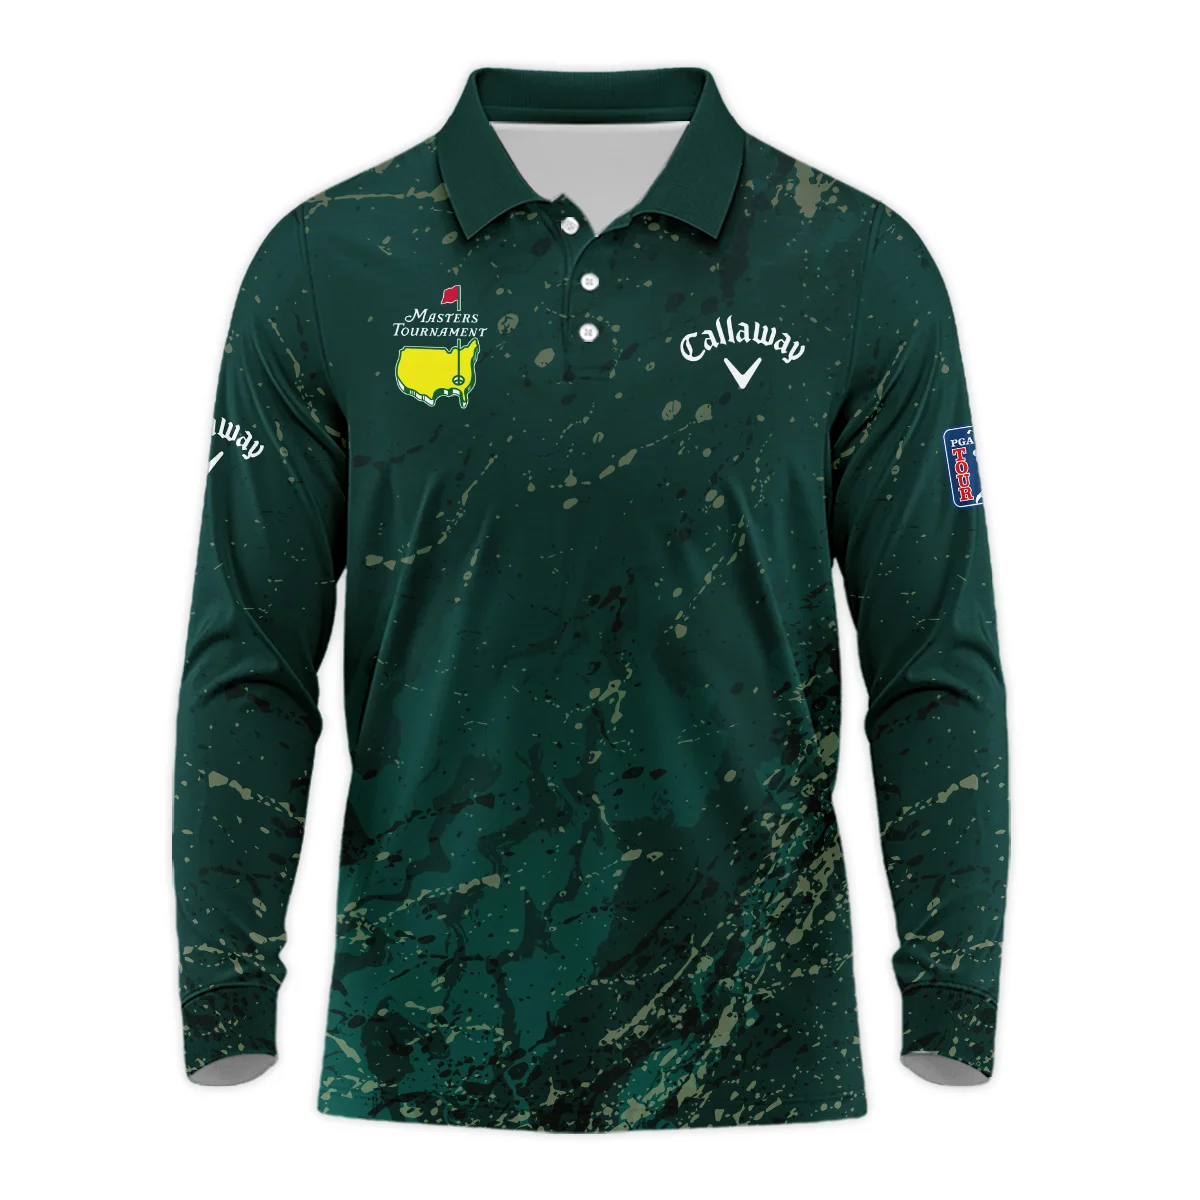 Old Cracked Texture With Gold Splash Paint Masters Tournament Callaway Long Polo Shirt Style Classic Long Polo Shirt For Men